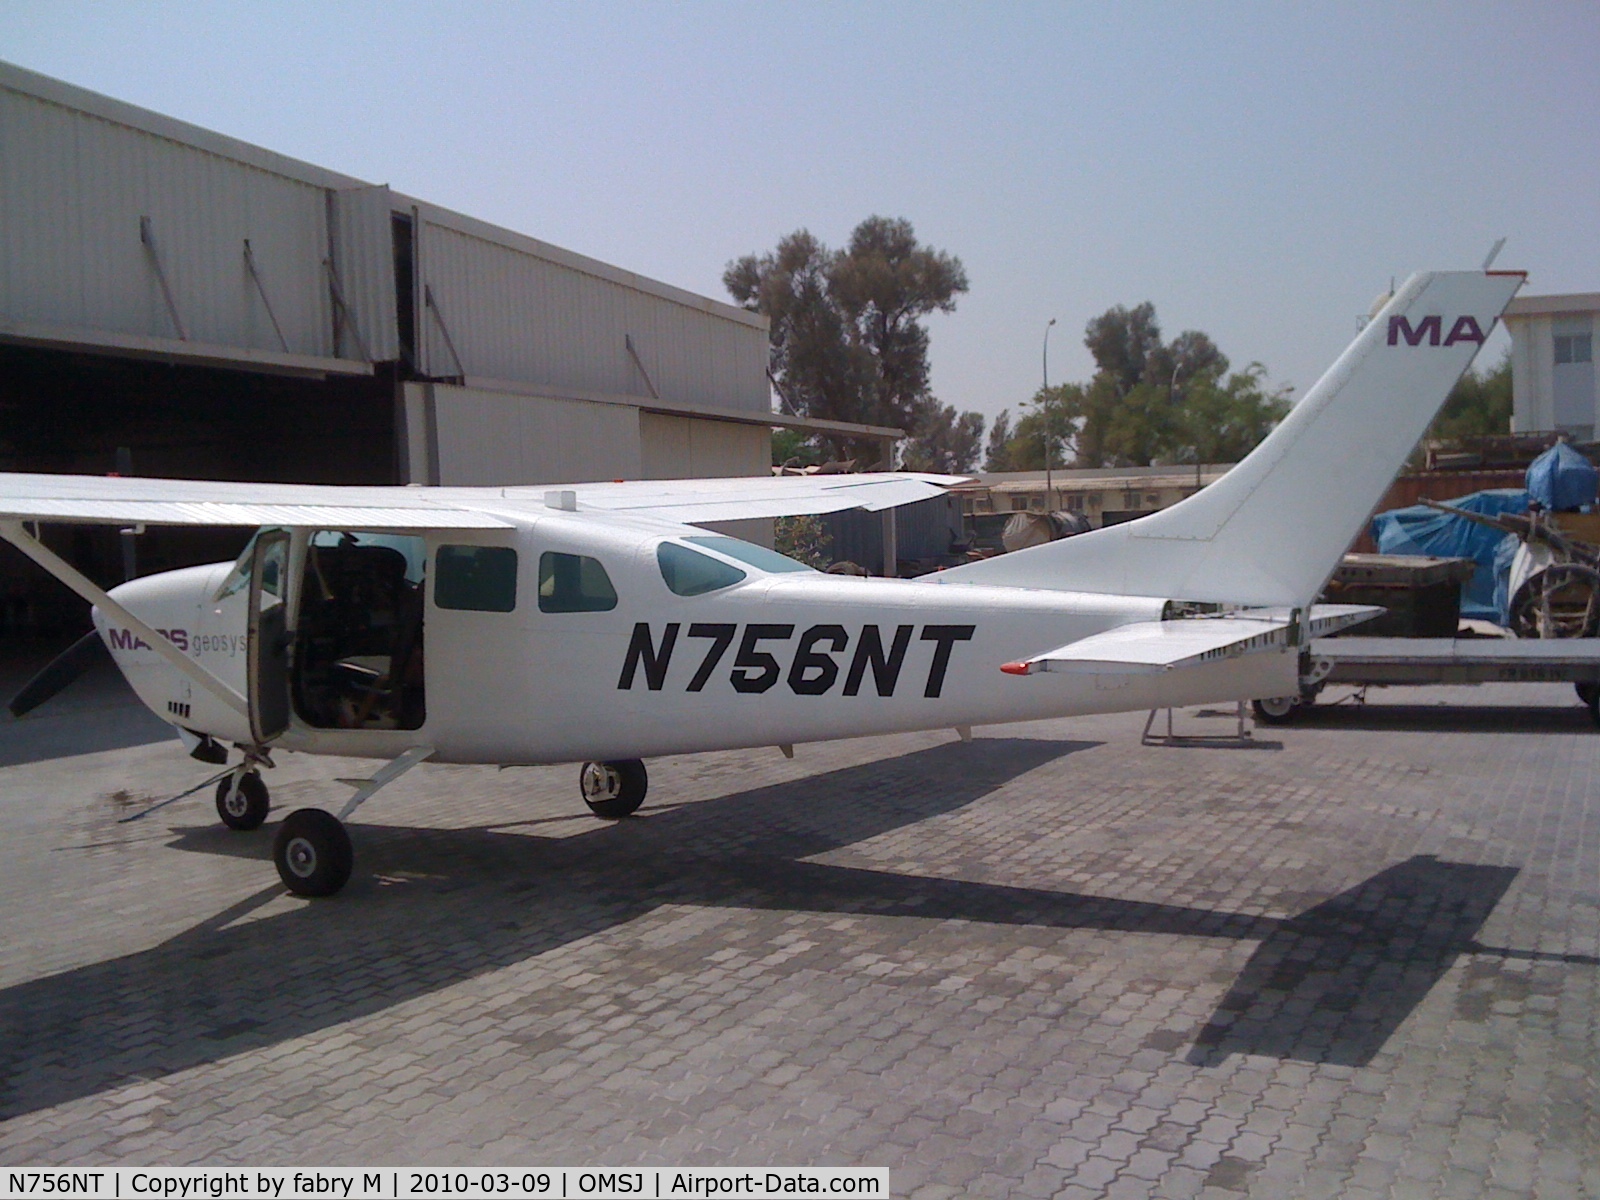 N756NT, 1977 Cessna TU206G Turbo Stationair C/N U20604230, Very low time Cessna 206 used for aerial survey in the middle east owned by Fugro-Maps in Sharjah, UAE. She is stored in SHJ and believed to be still for sale.